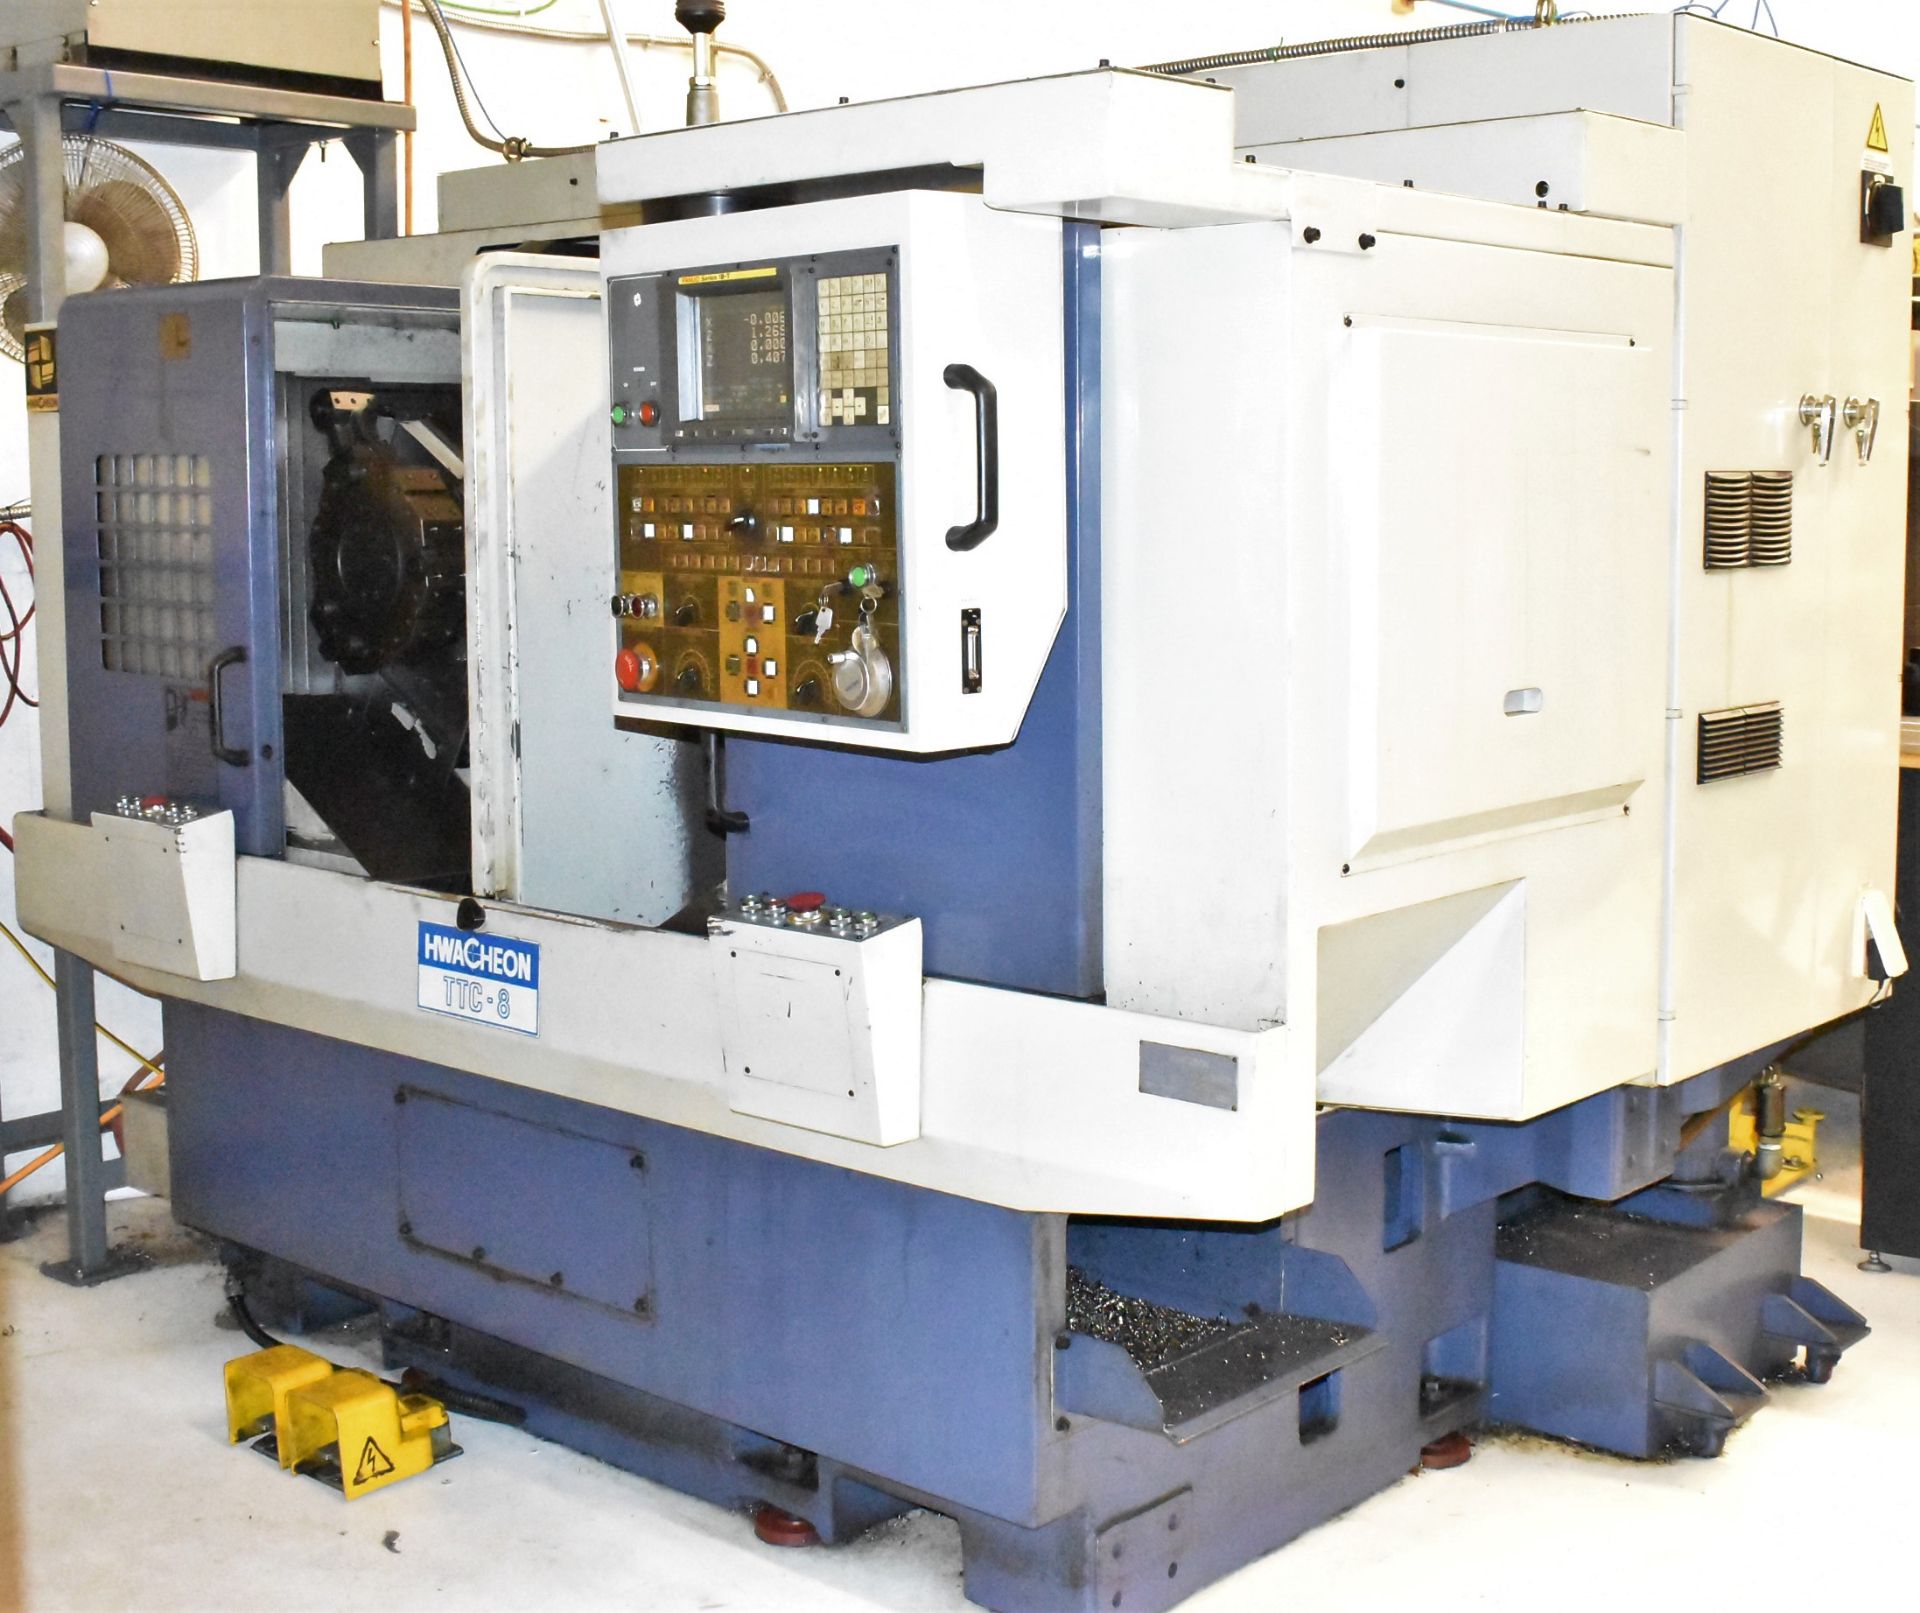 HWACHEON (2001) TTC-8 4 AXIS CNC TWIN SPINDLE TWIN TURRET TURNING CENTER WITH FANUC SERIES 18-T - Image 2 of 12